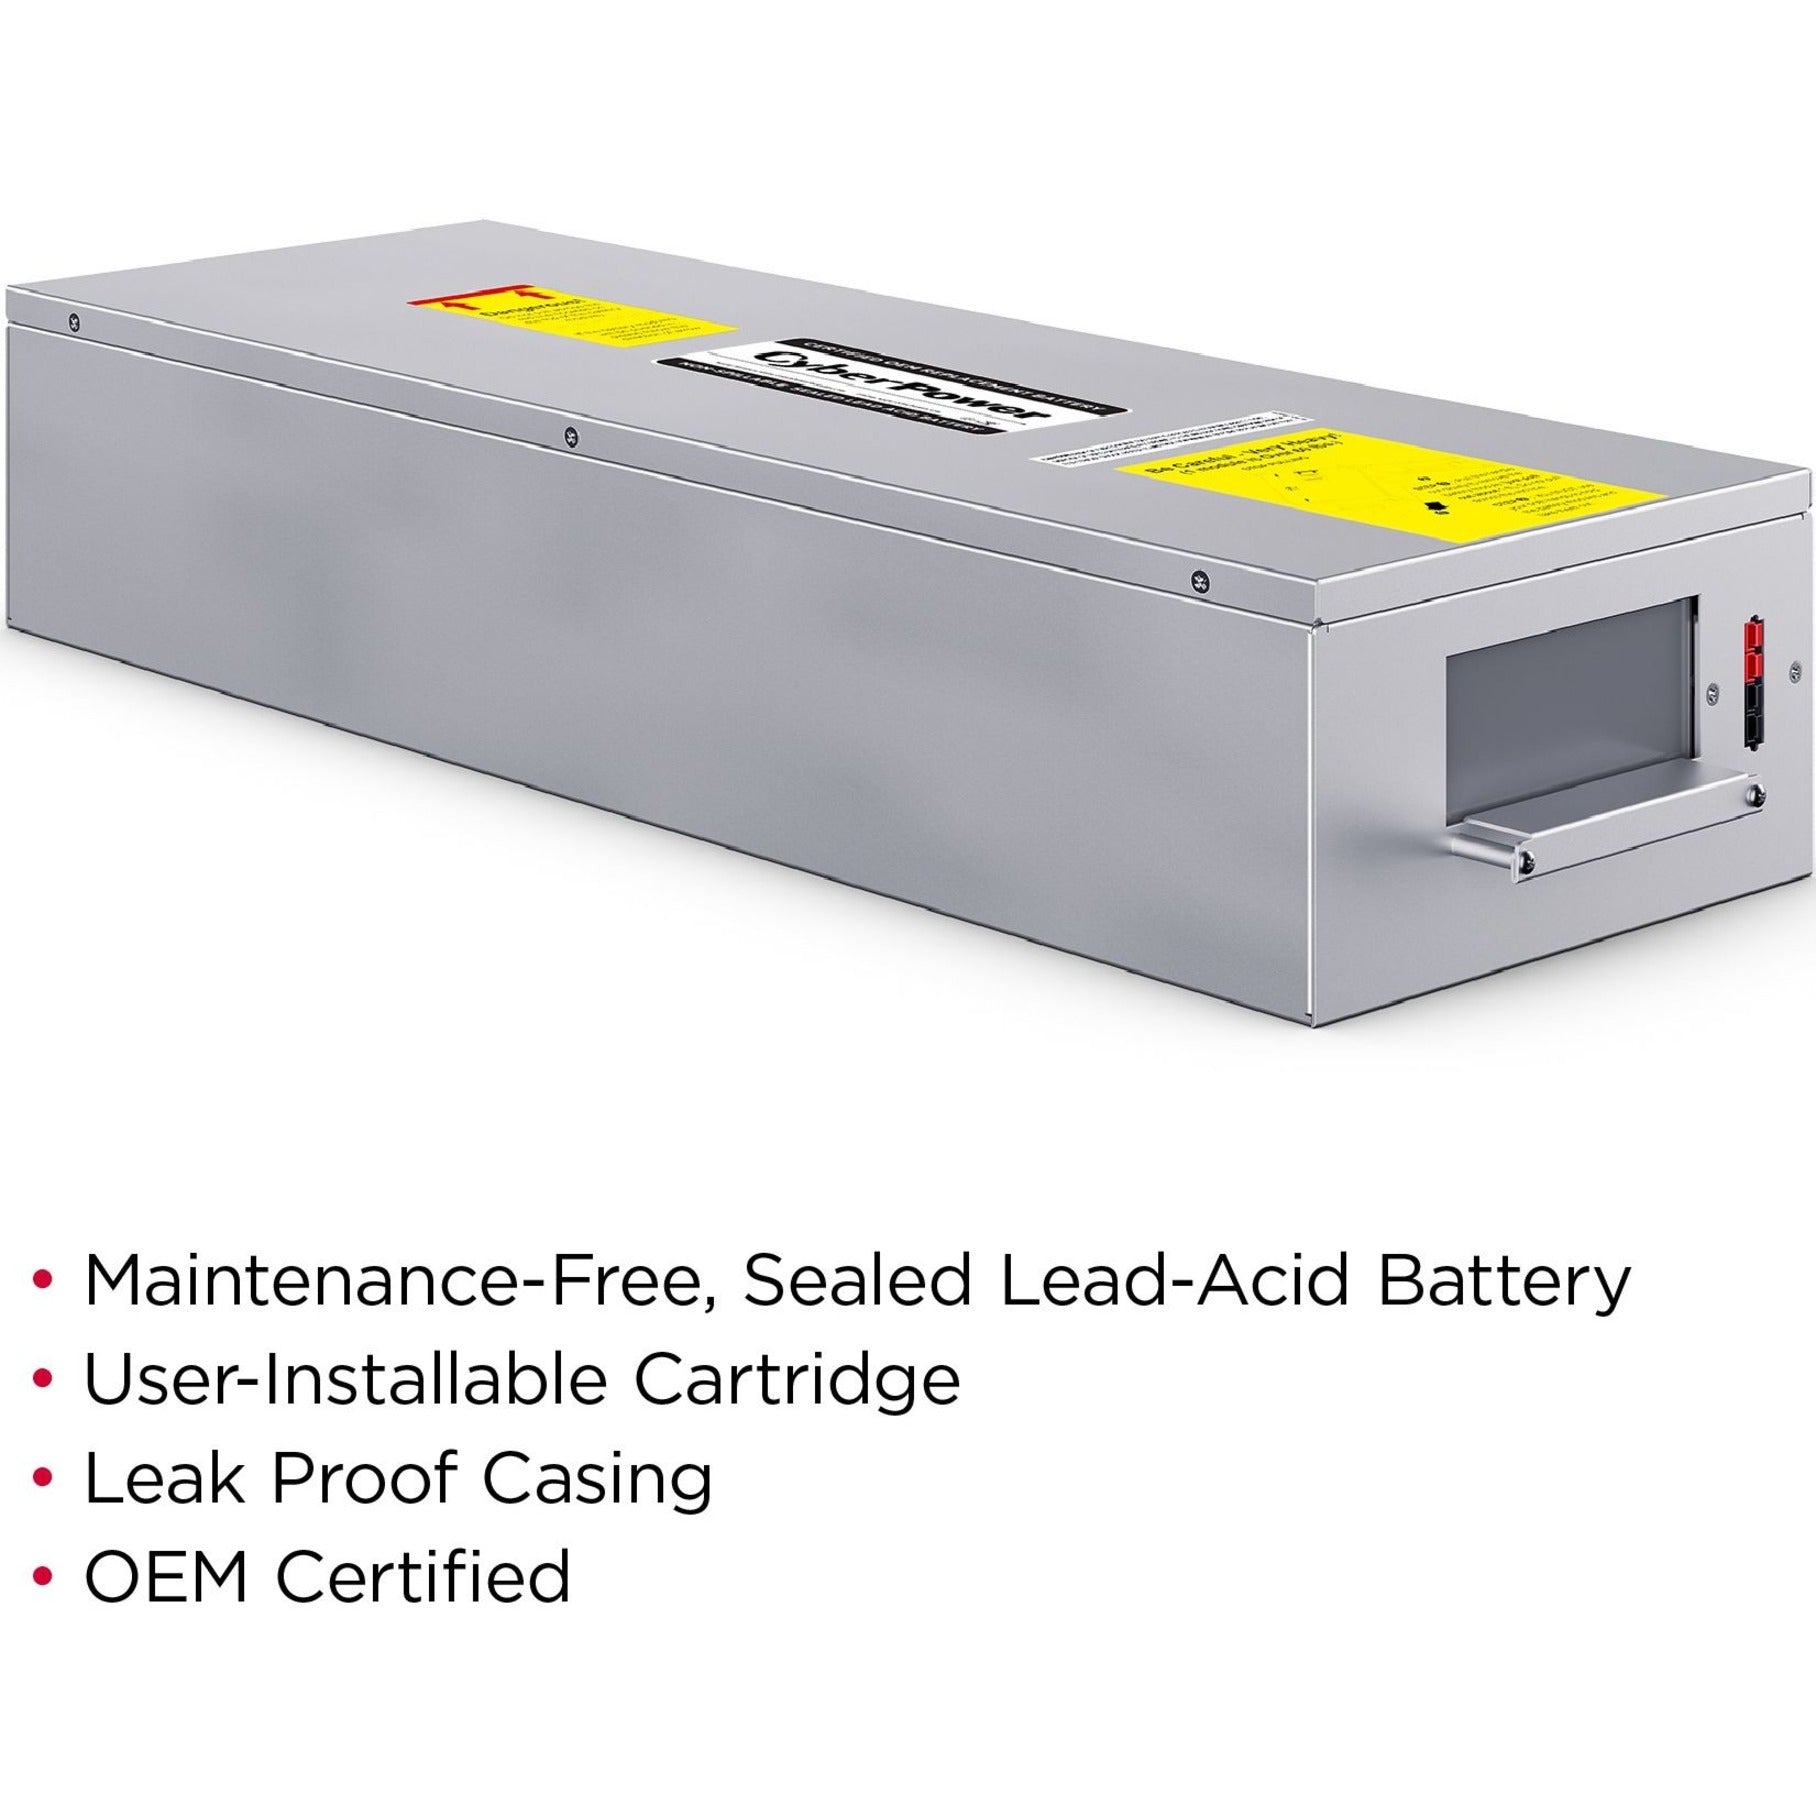 CyberPower RB1290X10 UPS Replacement Battery for OL8-10KVA UPS/BP240V50A EBM, 18mo Warranty